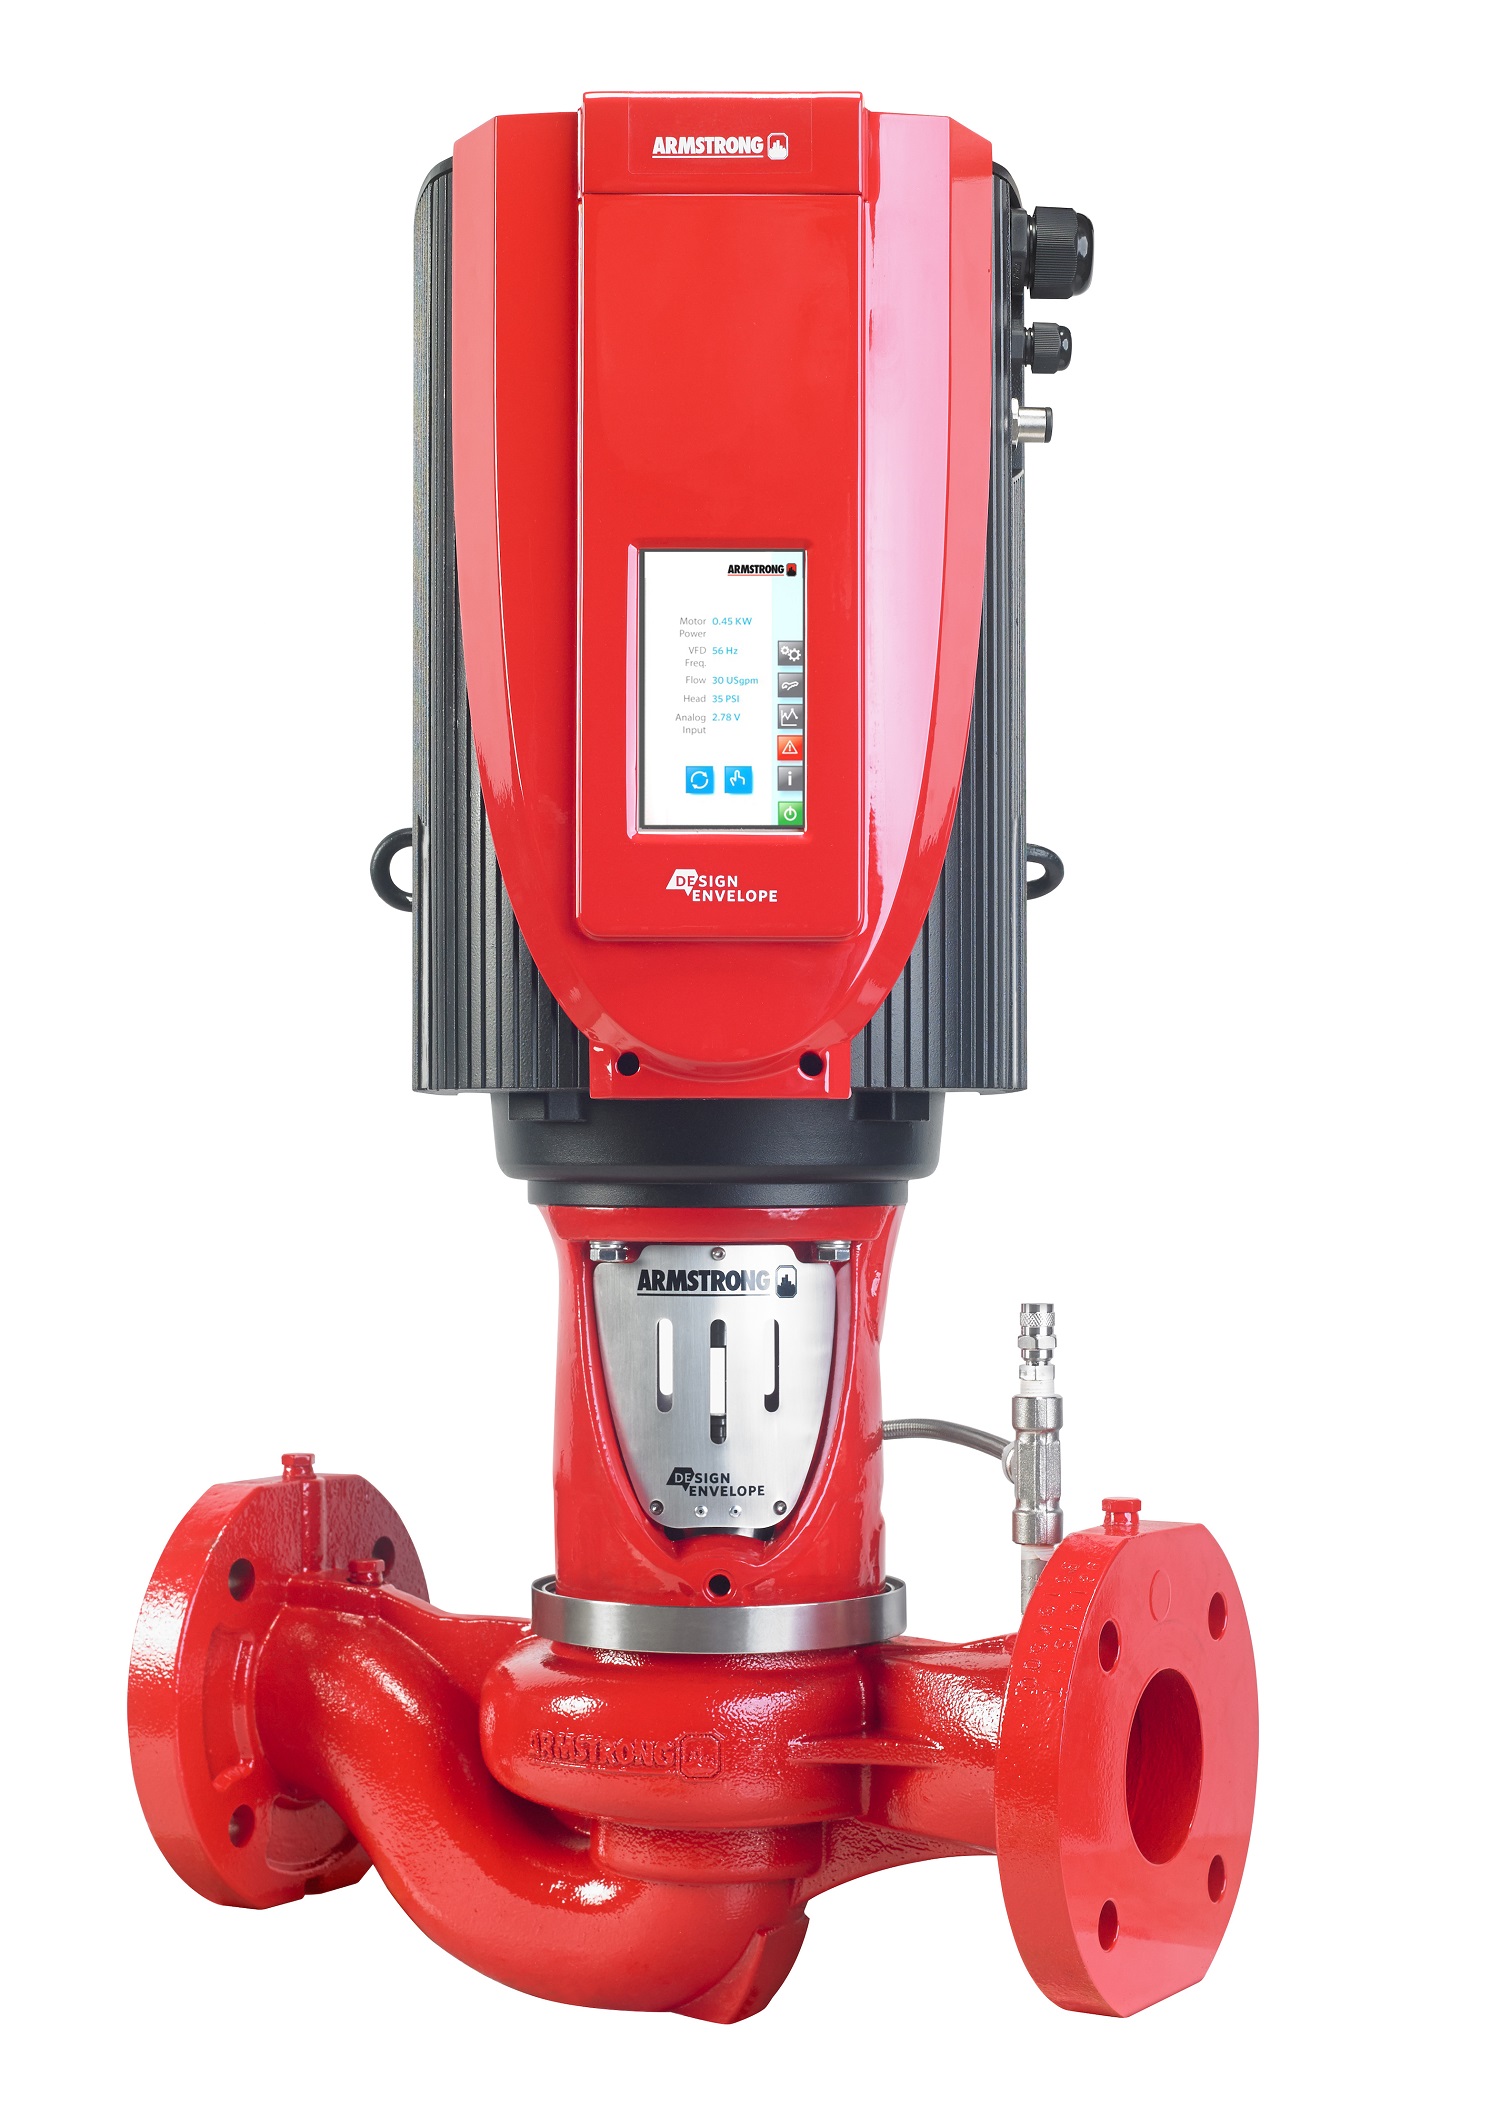 Armstrong’s Pump Manager has been selected as a finalist in the 2020 AHR Expo Innovation Awards.